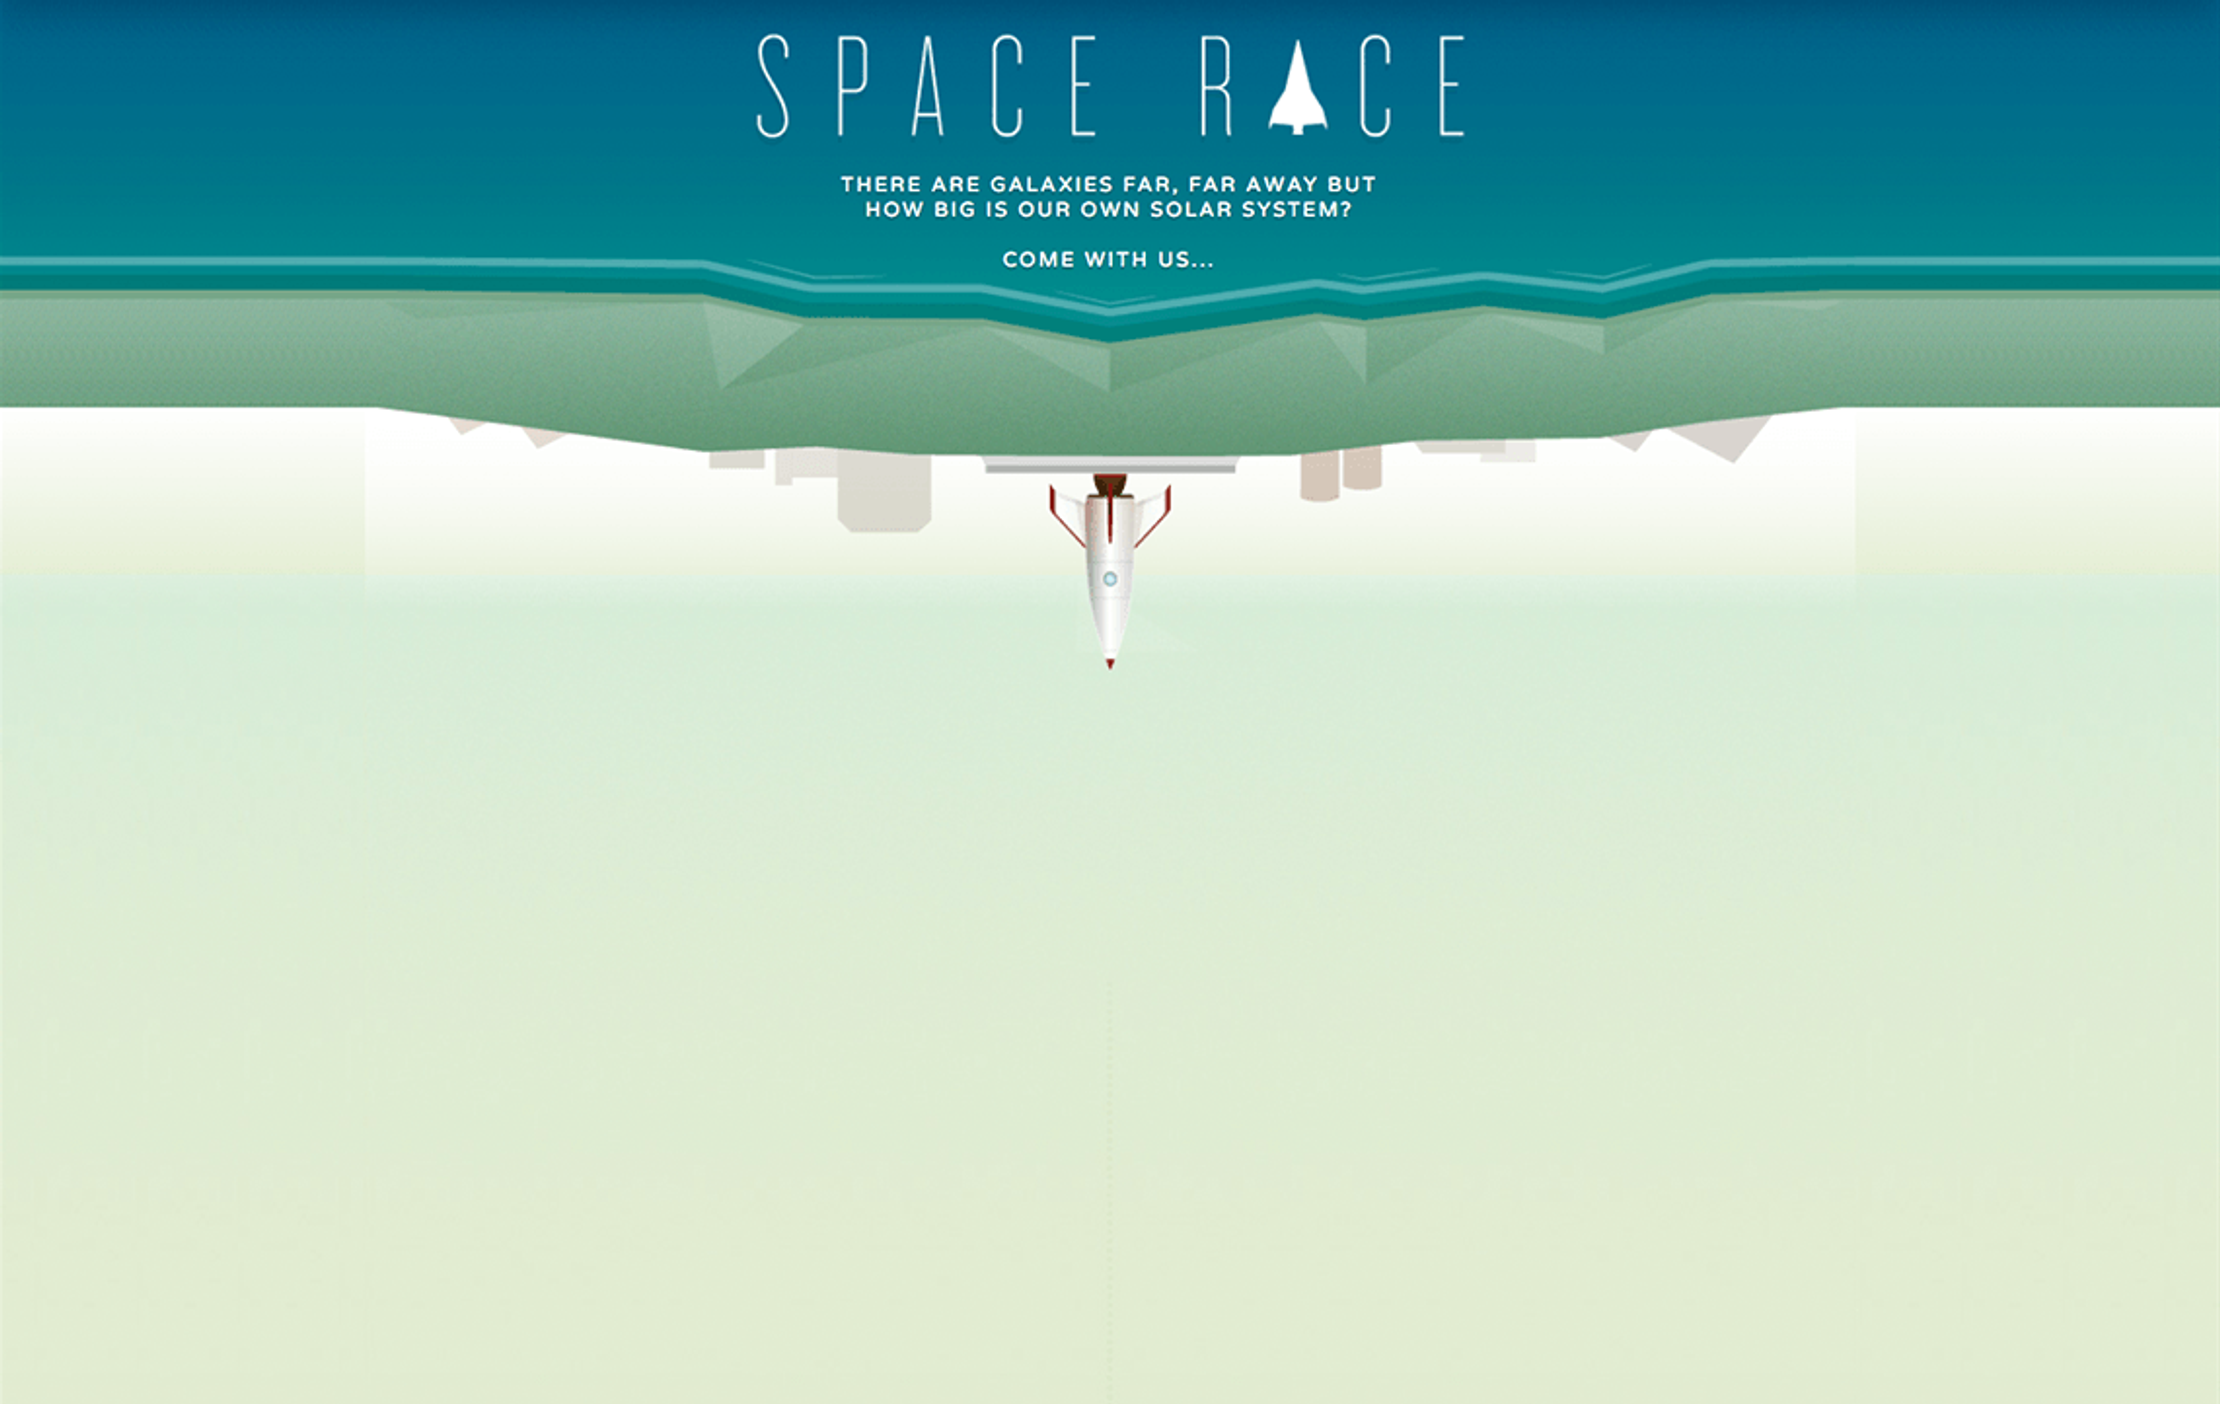 A screenshot from the start of the 'Space Race' website. It shows the title 'Space Race' and a low-poly illustration of a rocket sat on a launch pad pointing down the page.